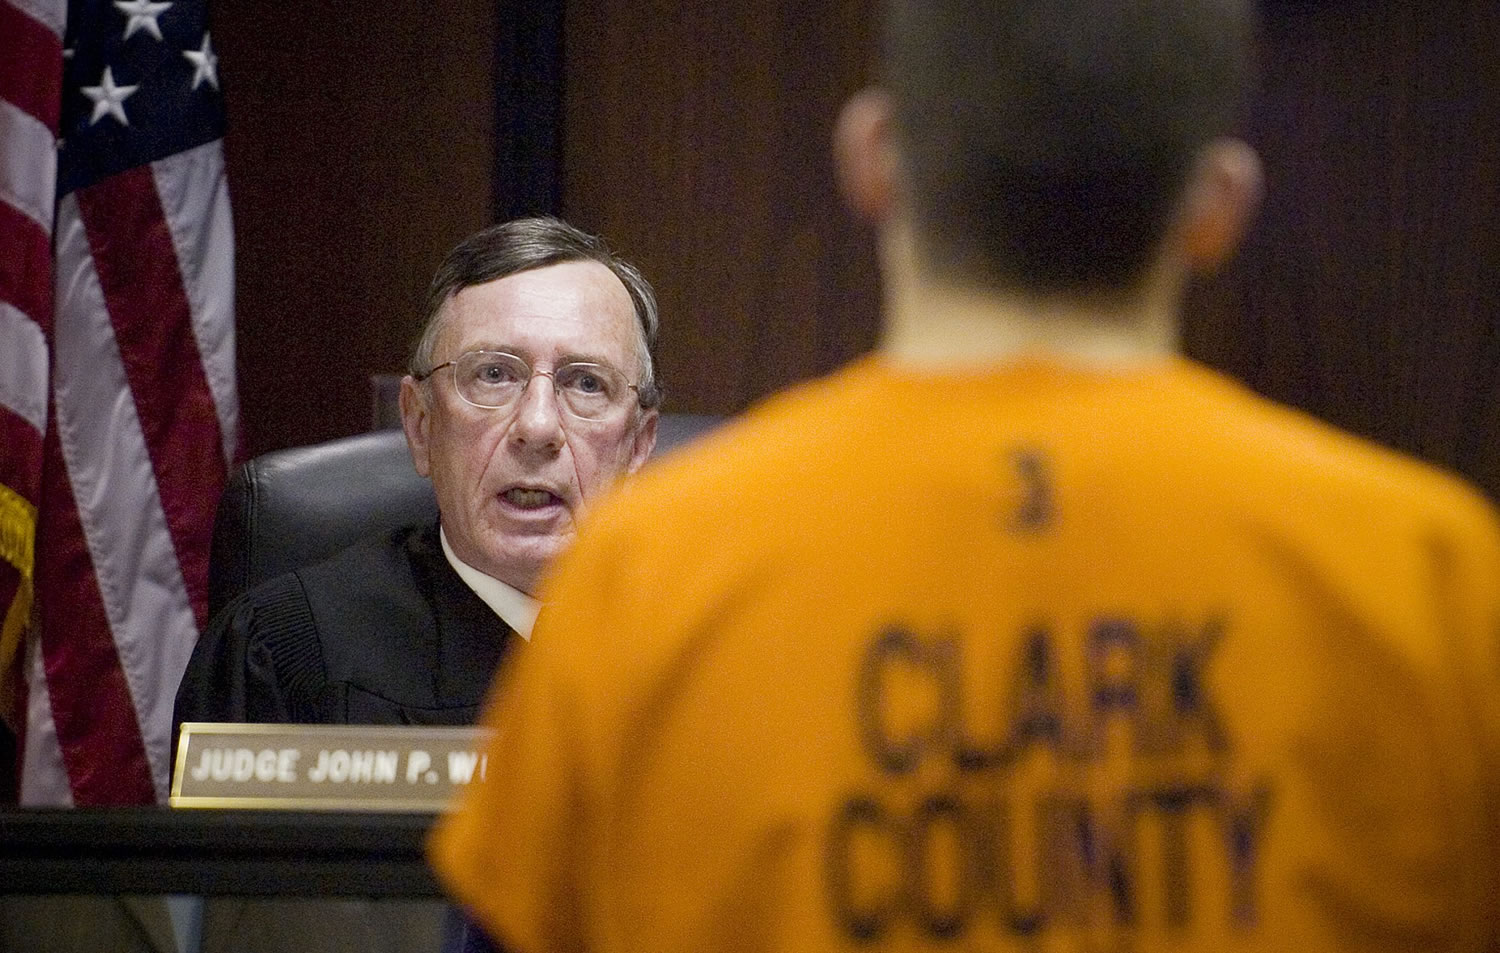 Clark County Superior Court Judge John Wulle, pictured here in February 2008, answered a state judicial board's statement of charges against him on Thursday.